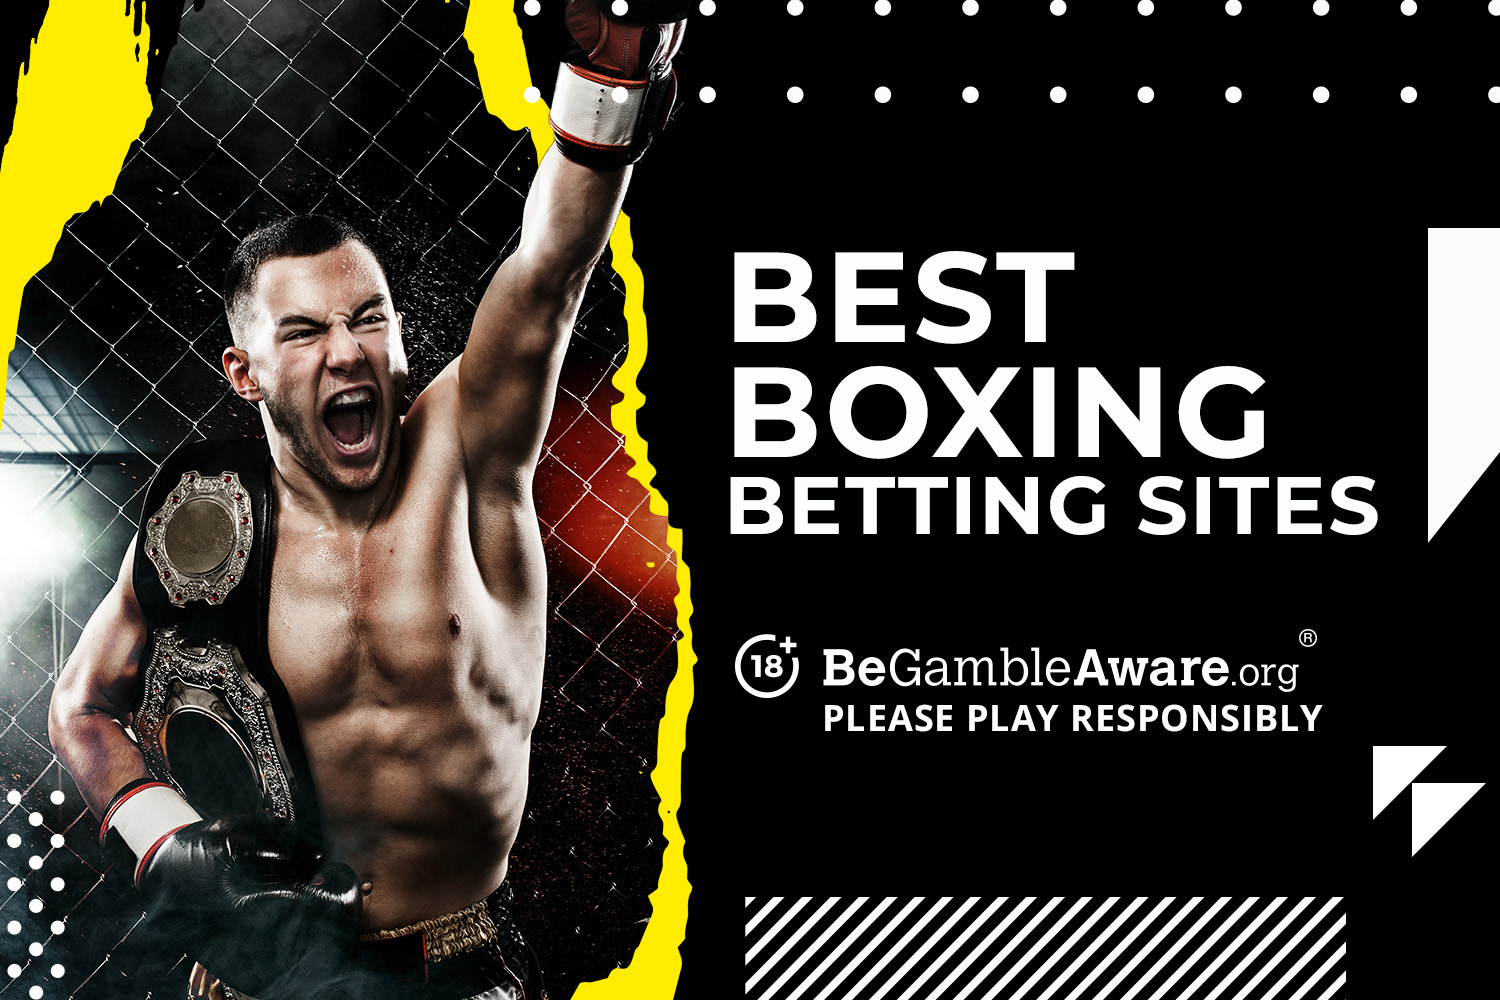 Photo: best online betting sites for boxing